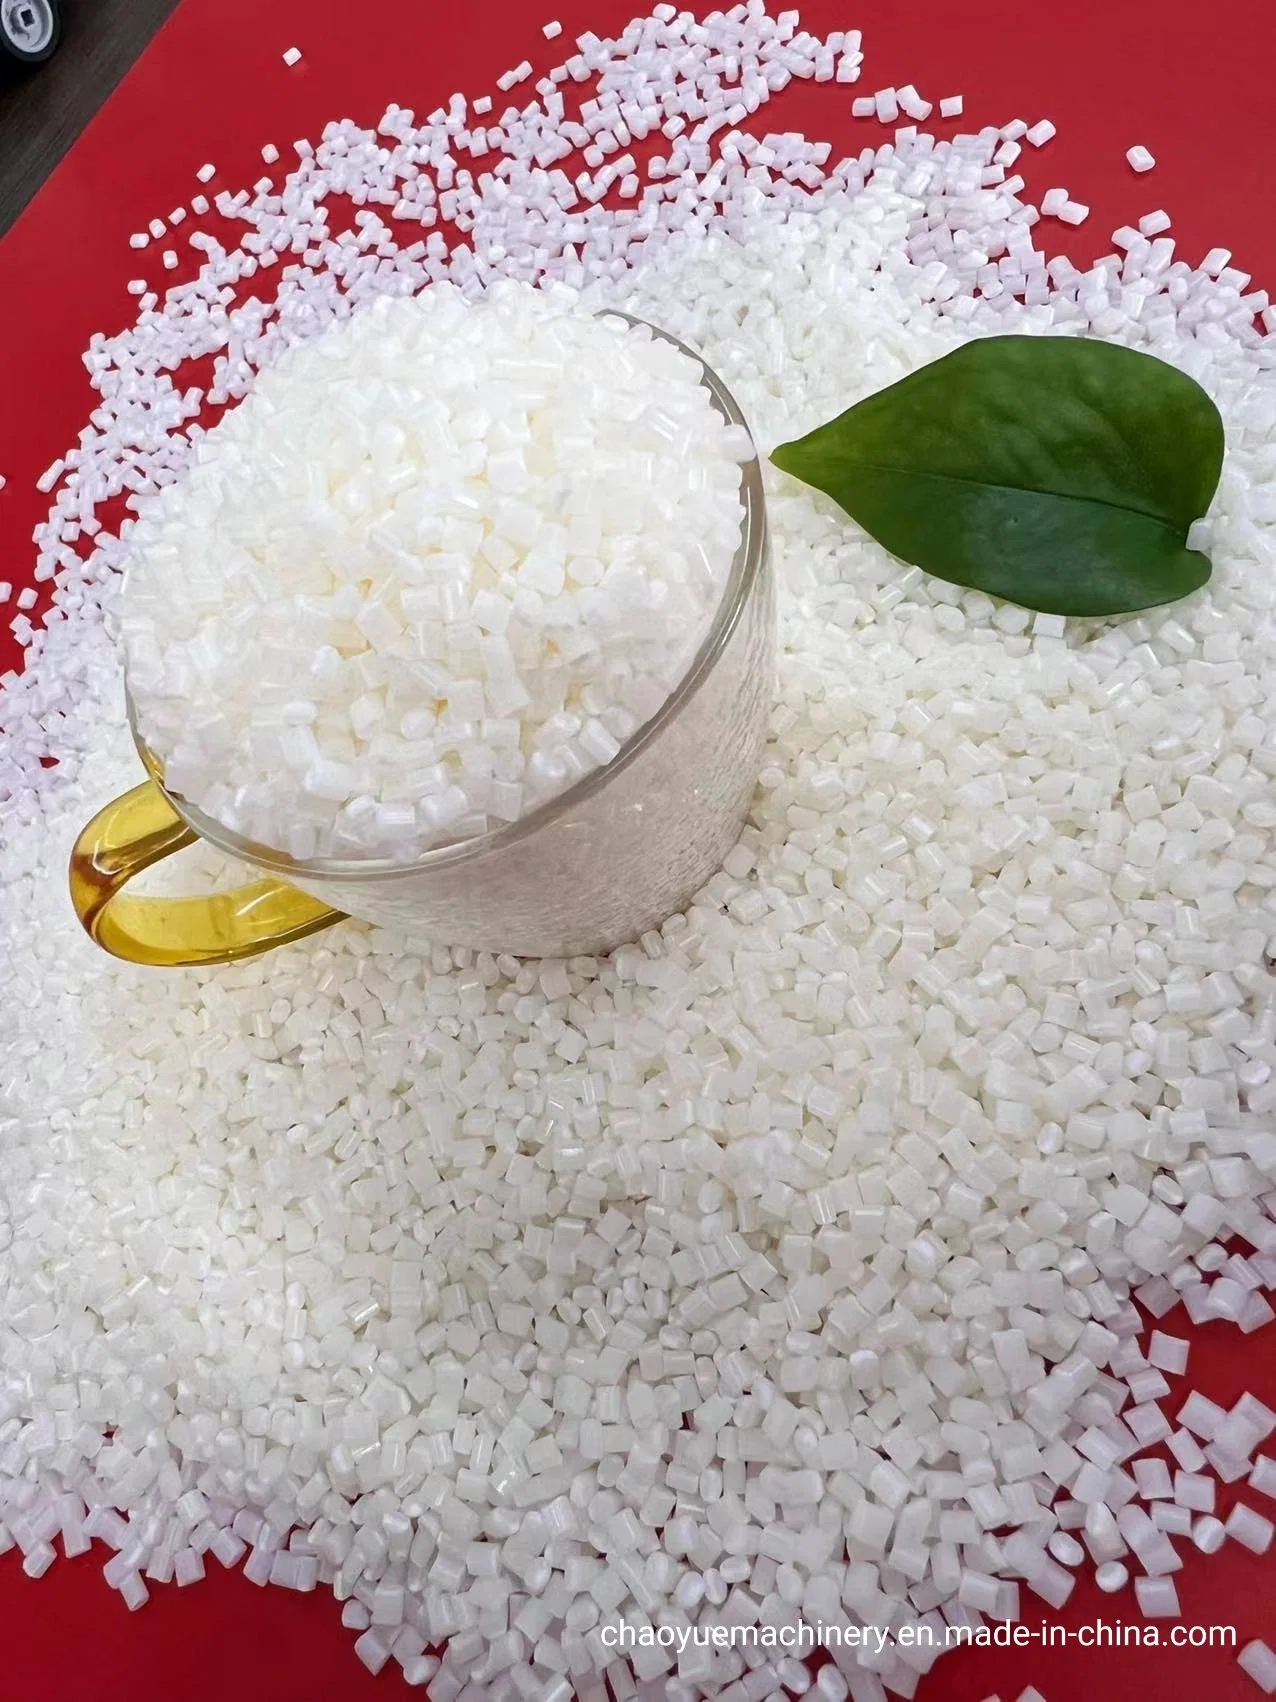 Good Quality ABS Raw Material Plastic Granules Material Virgin White Color Resin